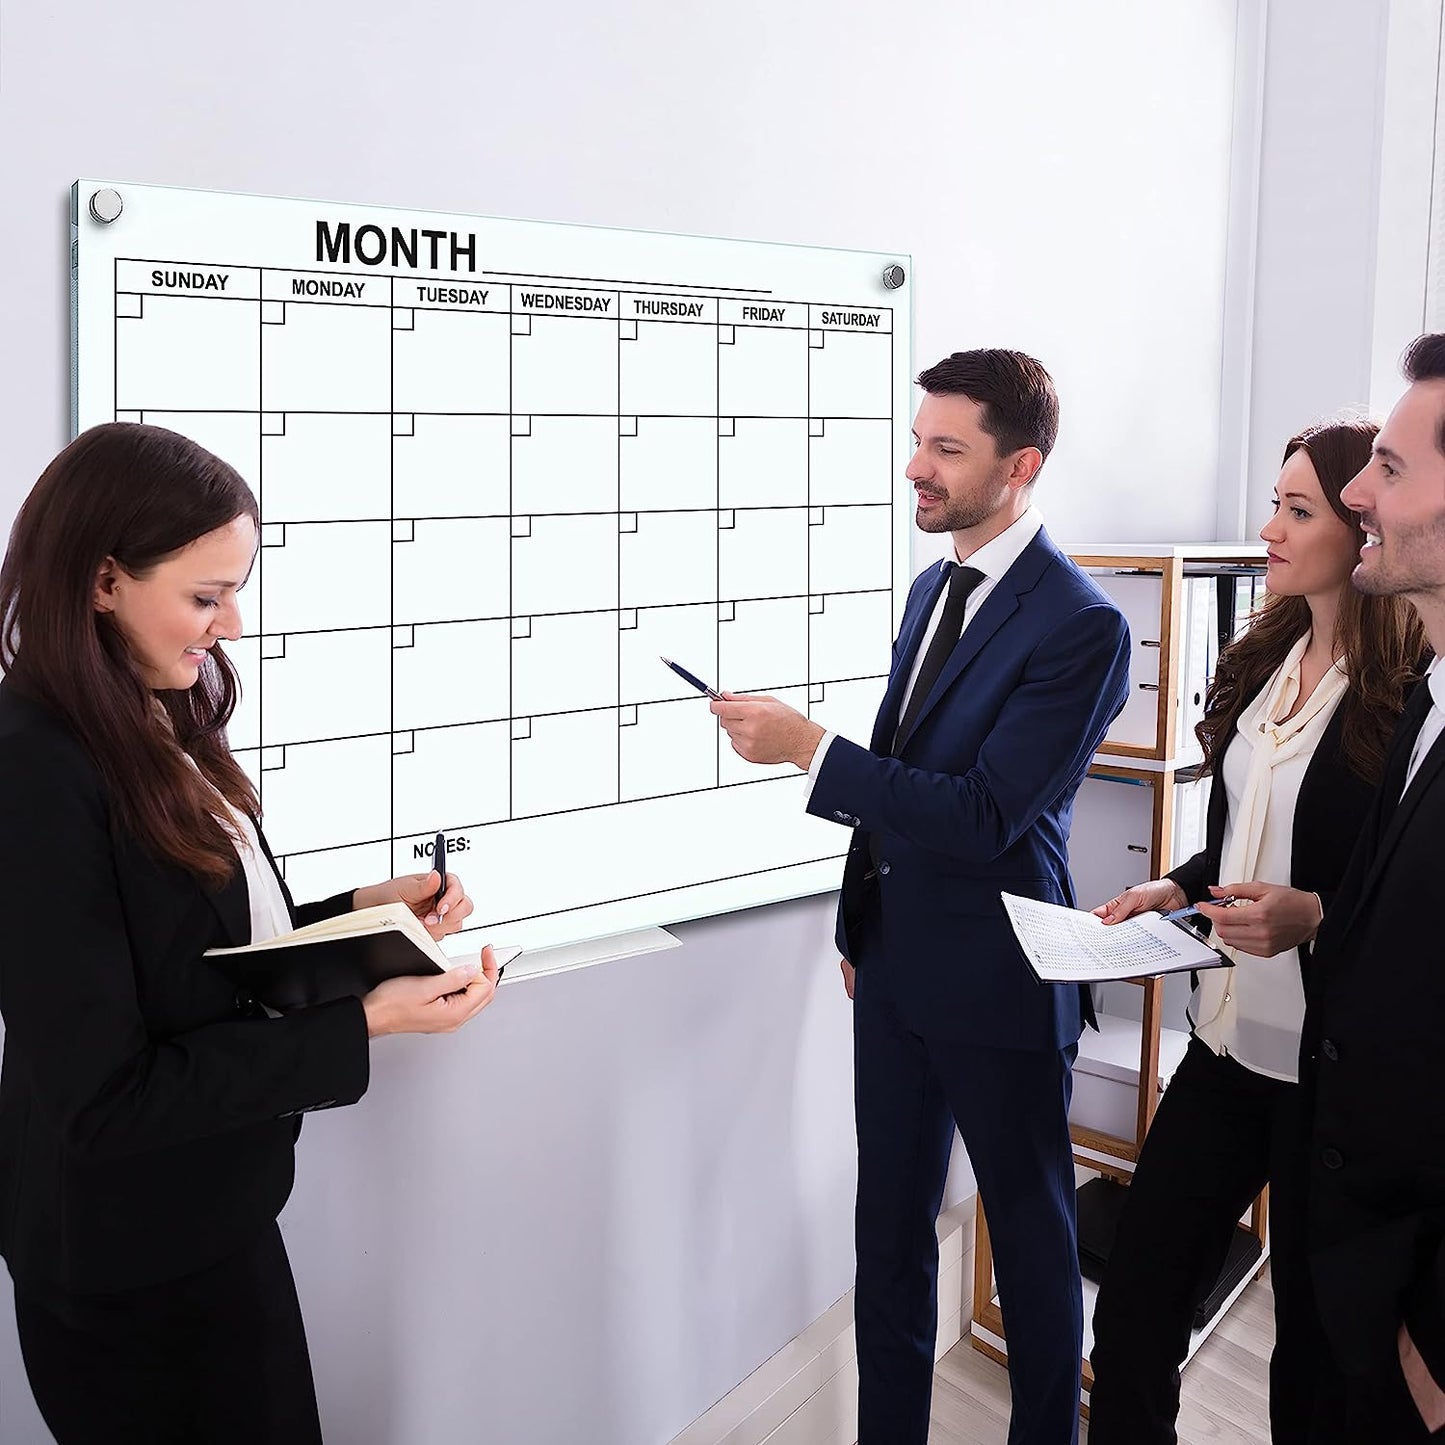 monthly planner whiteboard for offices 34x46